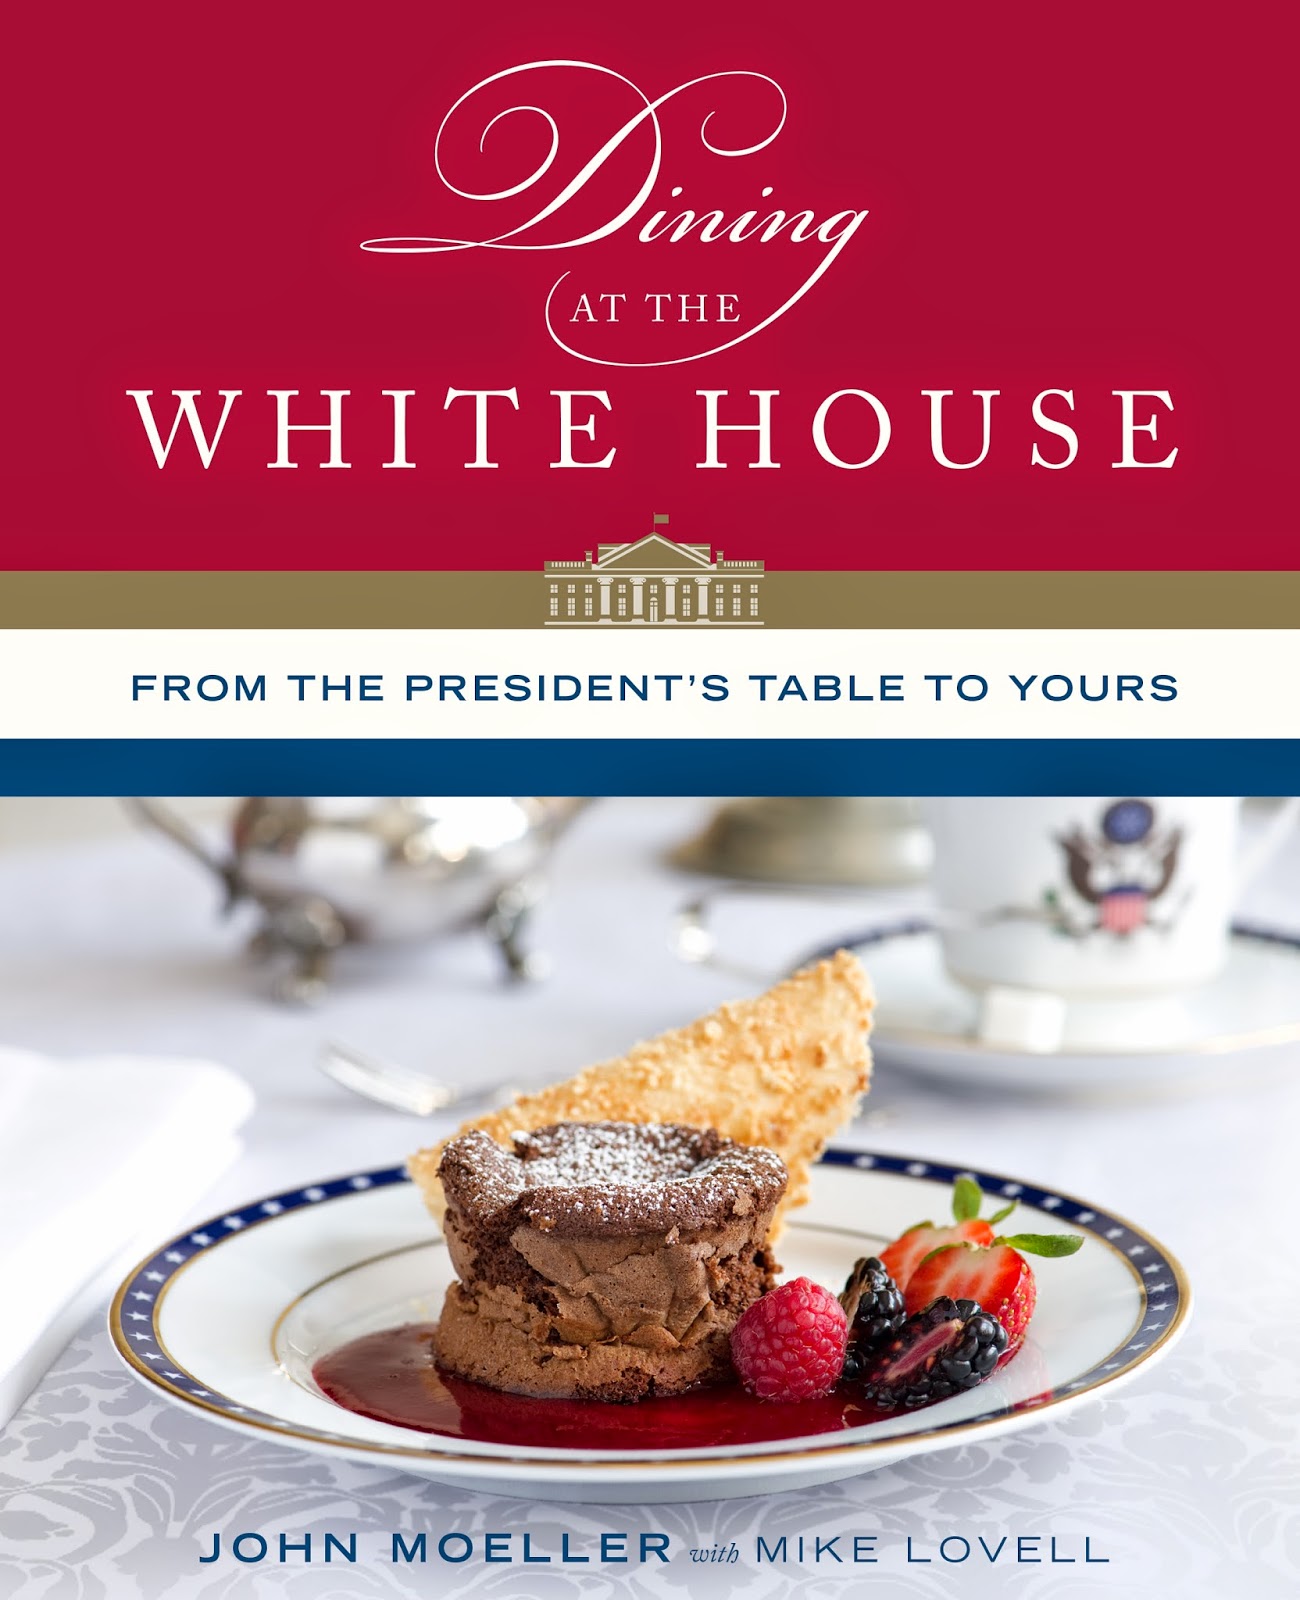 interview with white house chef john moeller featuring dining at the white house